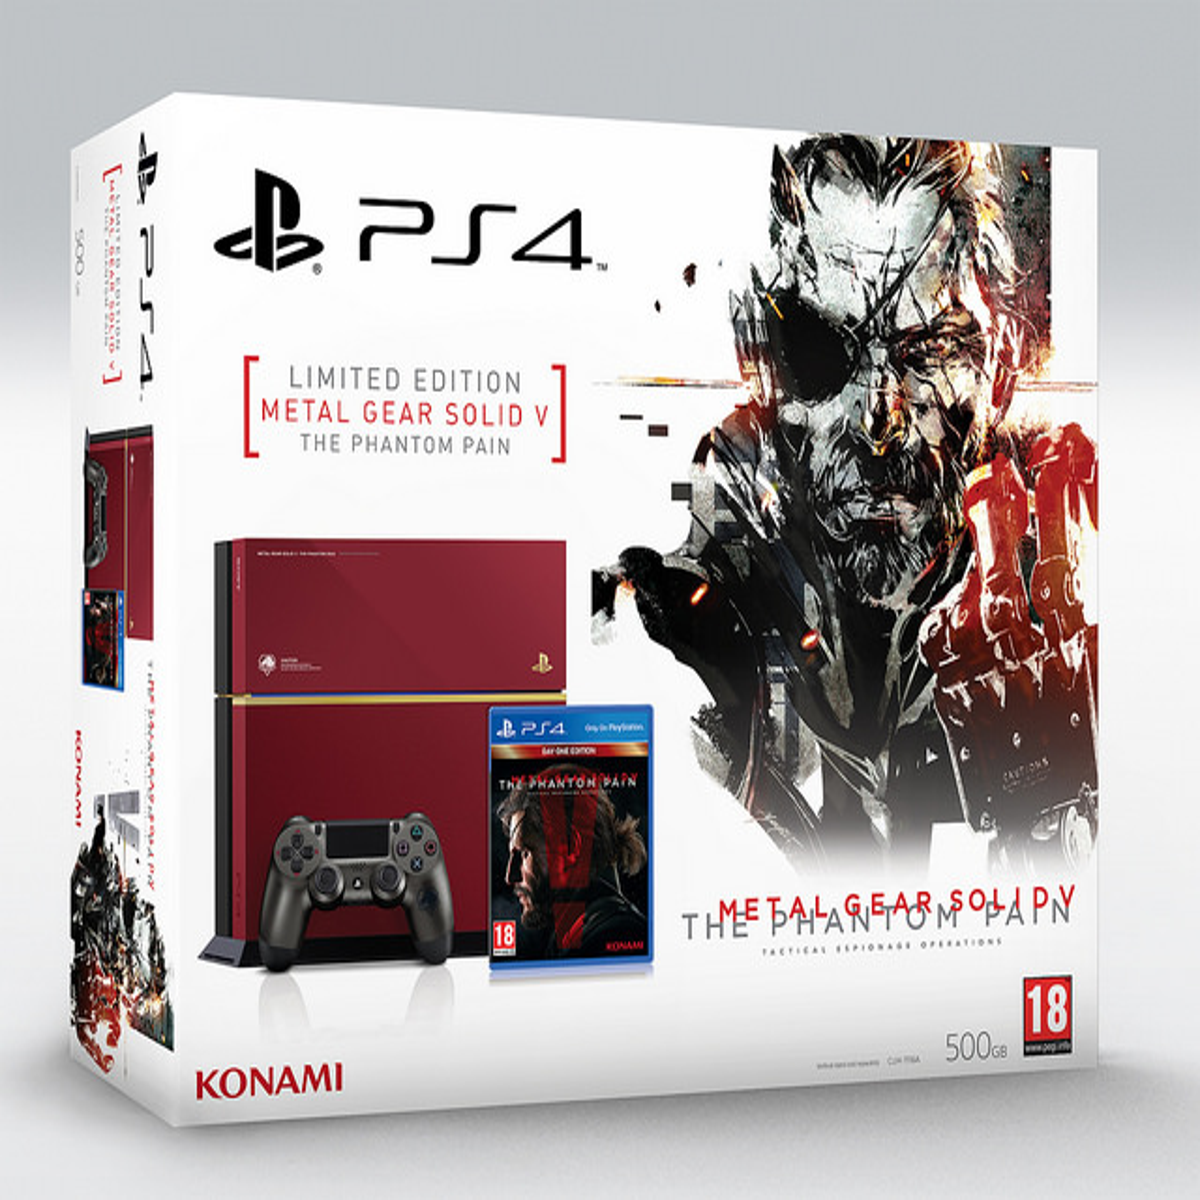 The Metal Gear Solid 5 Limited Edition is available to now at GAME | VG247